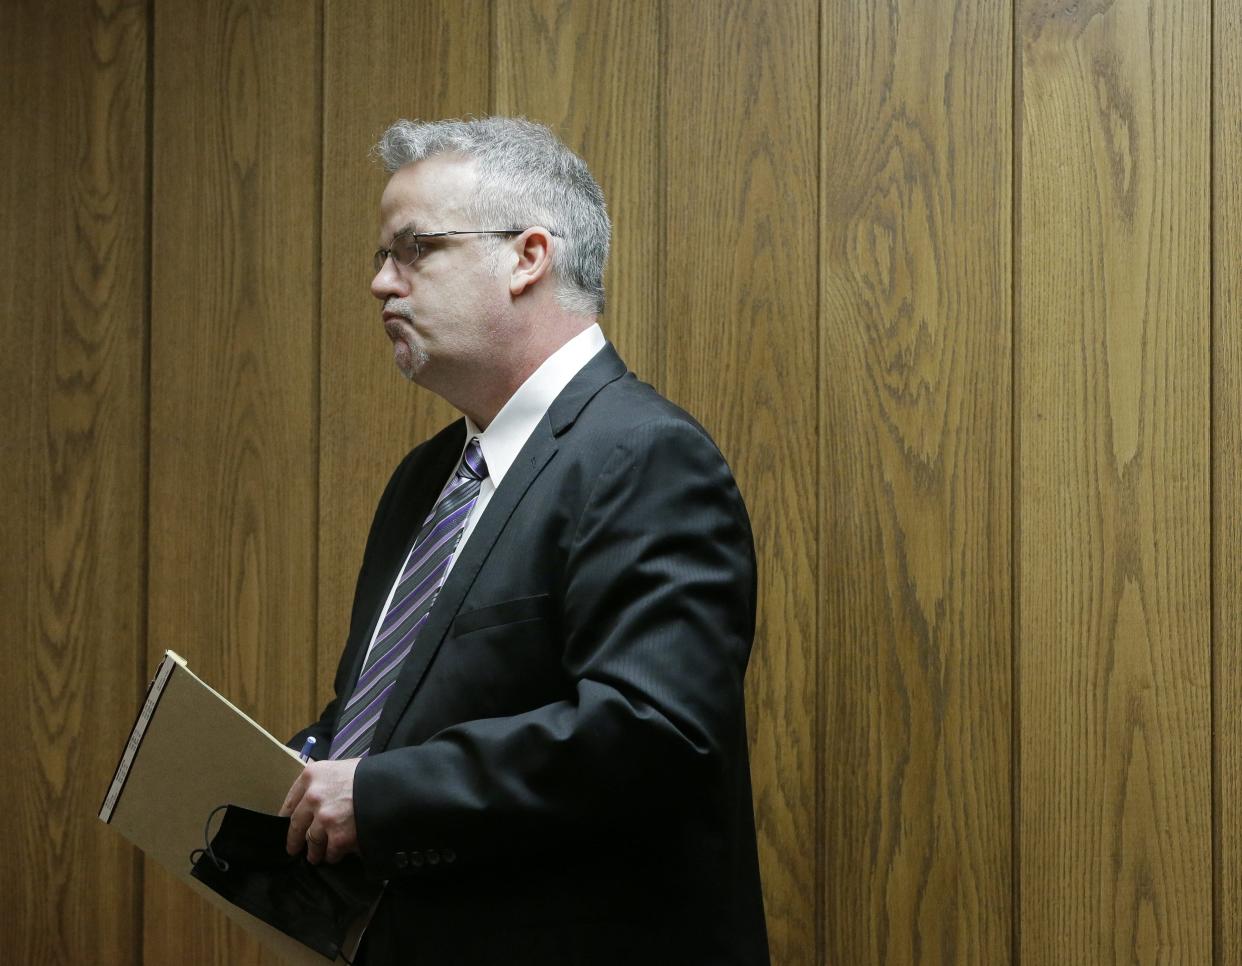 Marion County Judge Jason Warner stands to make a statement to the court before he and his wife Julia Warner were sentenced to two years in prison Thursday, April 14, 2021, by Judge Patricia Cosgrove in the Marion County Court of Common Pleas for a June 2020 hit and run that injured a 19-year-old man 2020.Judge Jason Warner was found guilty of complicity to leaving the scene of an accident, a felony of the fourth degree, and complicity to tampering with evidence, a felony of the third degree. Wife Julia Warner, the driver of the vehicle, was found guilty of two counts of misdemeanor negligent assault, complicity to leaving the scene of an accident and complicity to tampering with evidence.